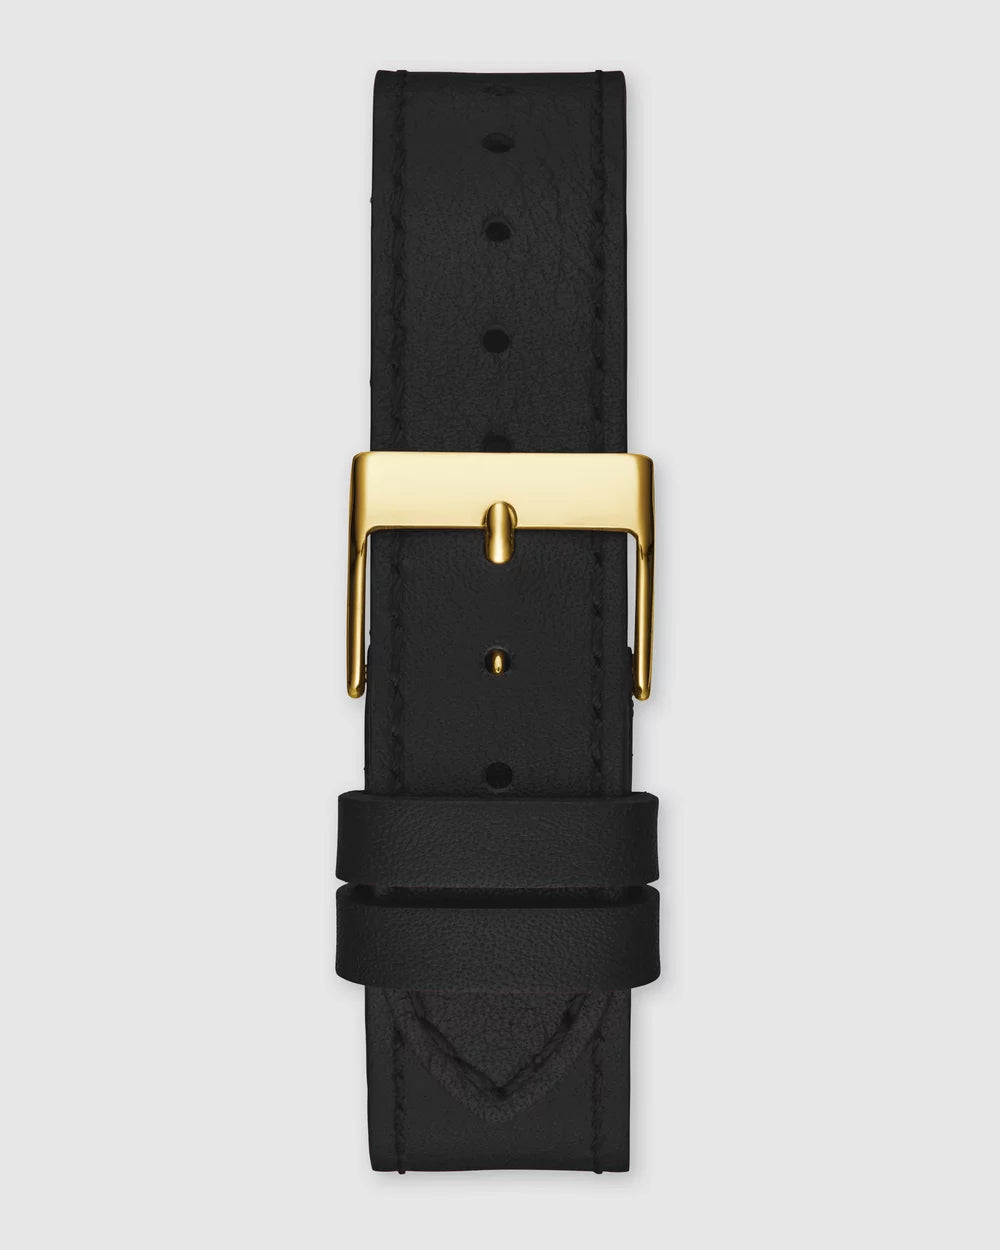 Guess Watch Fame Gold Crystal with Black Leather